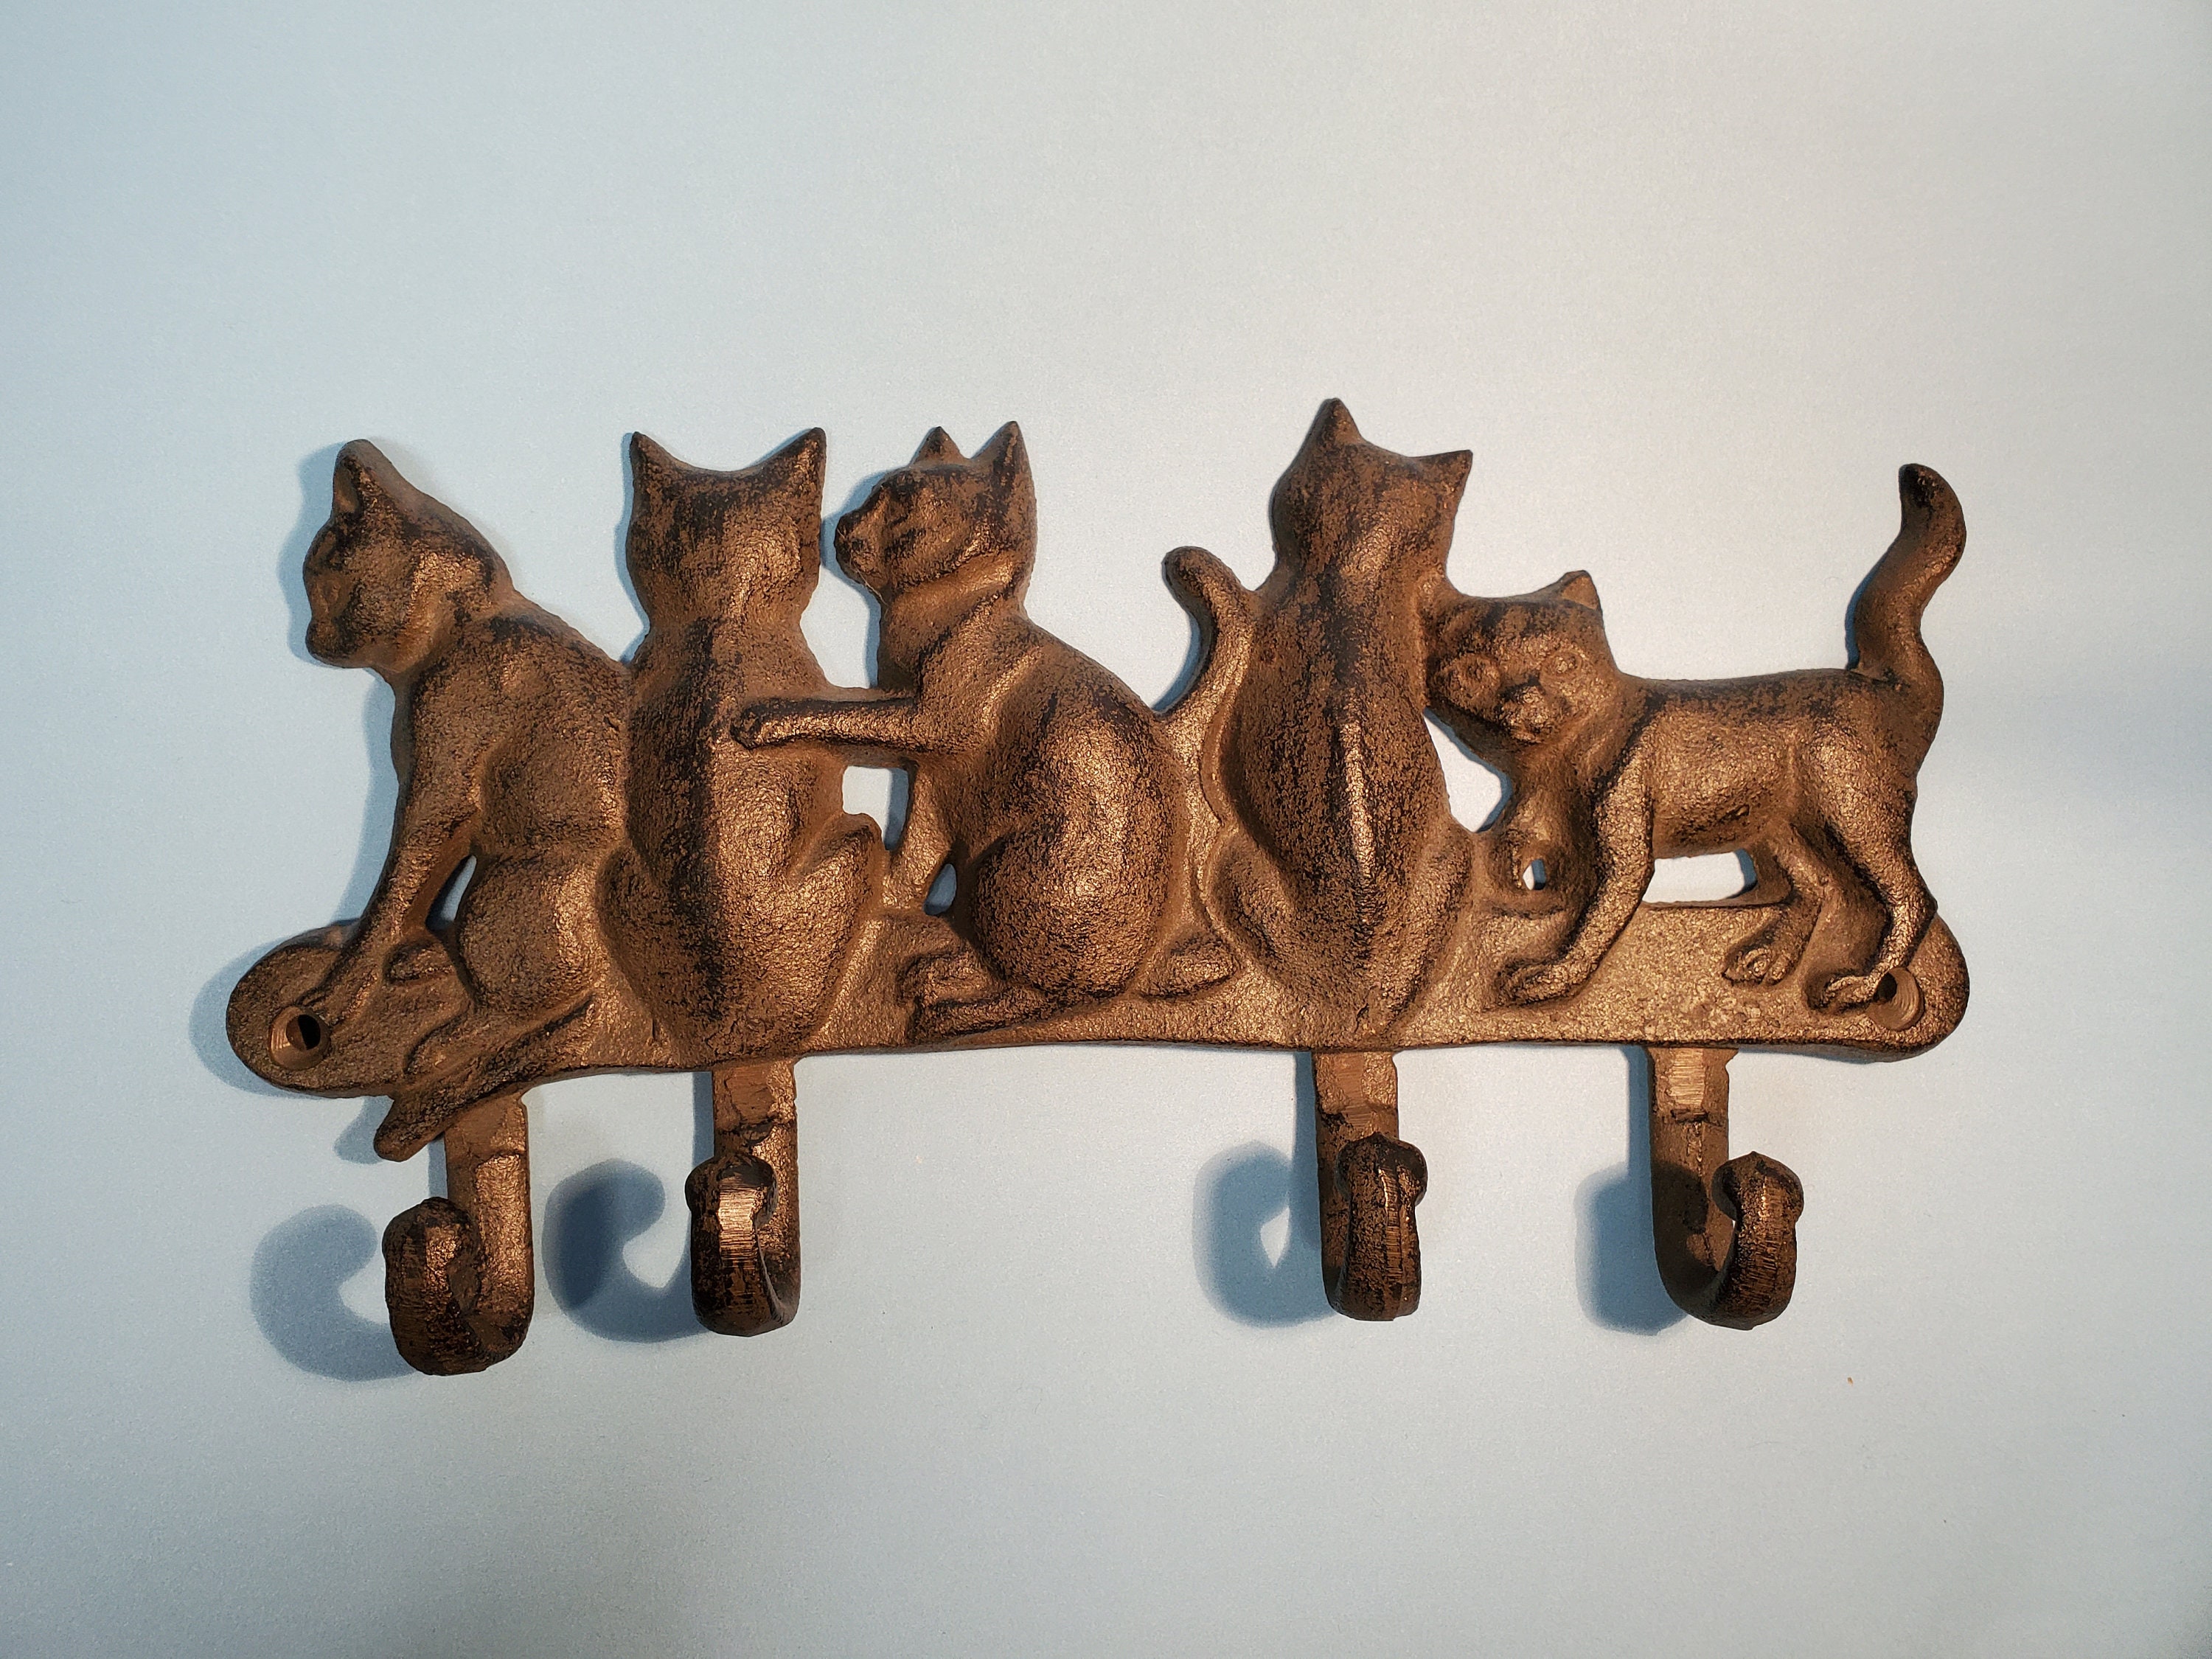 Vintage Cat Cast Iron Tail Hook Wall Hanger